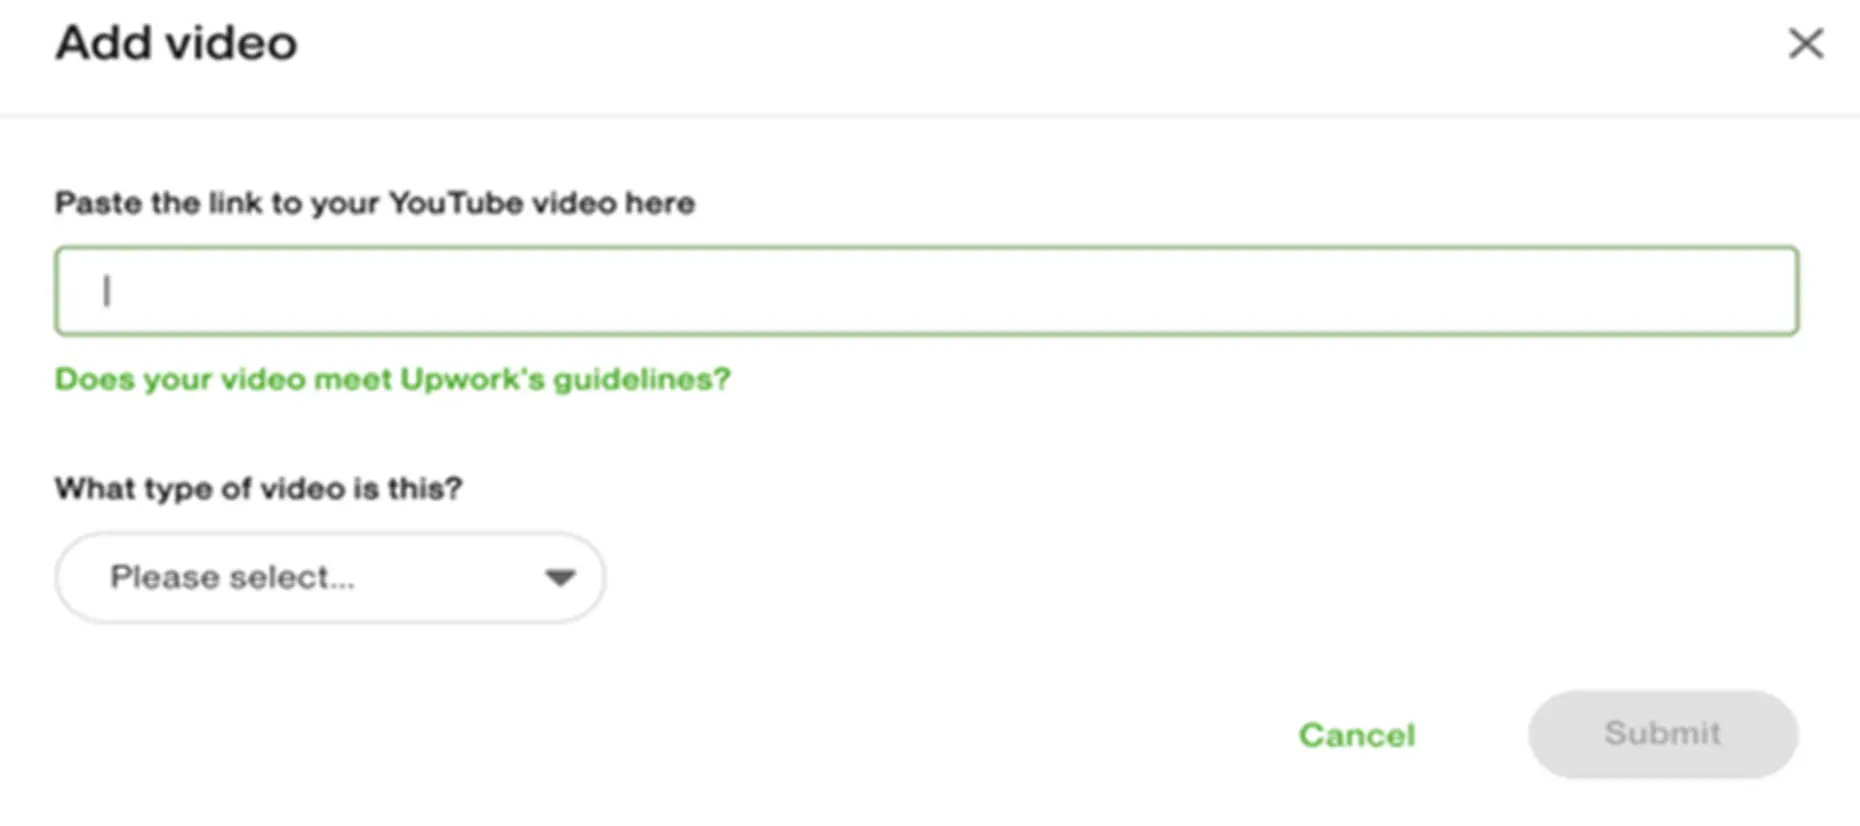 Upload your video